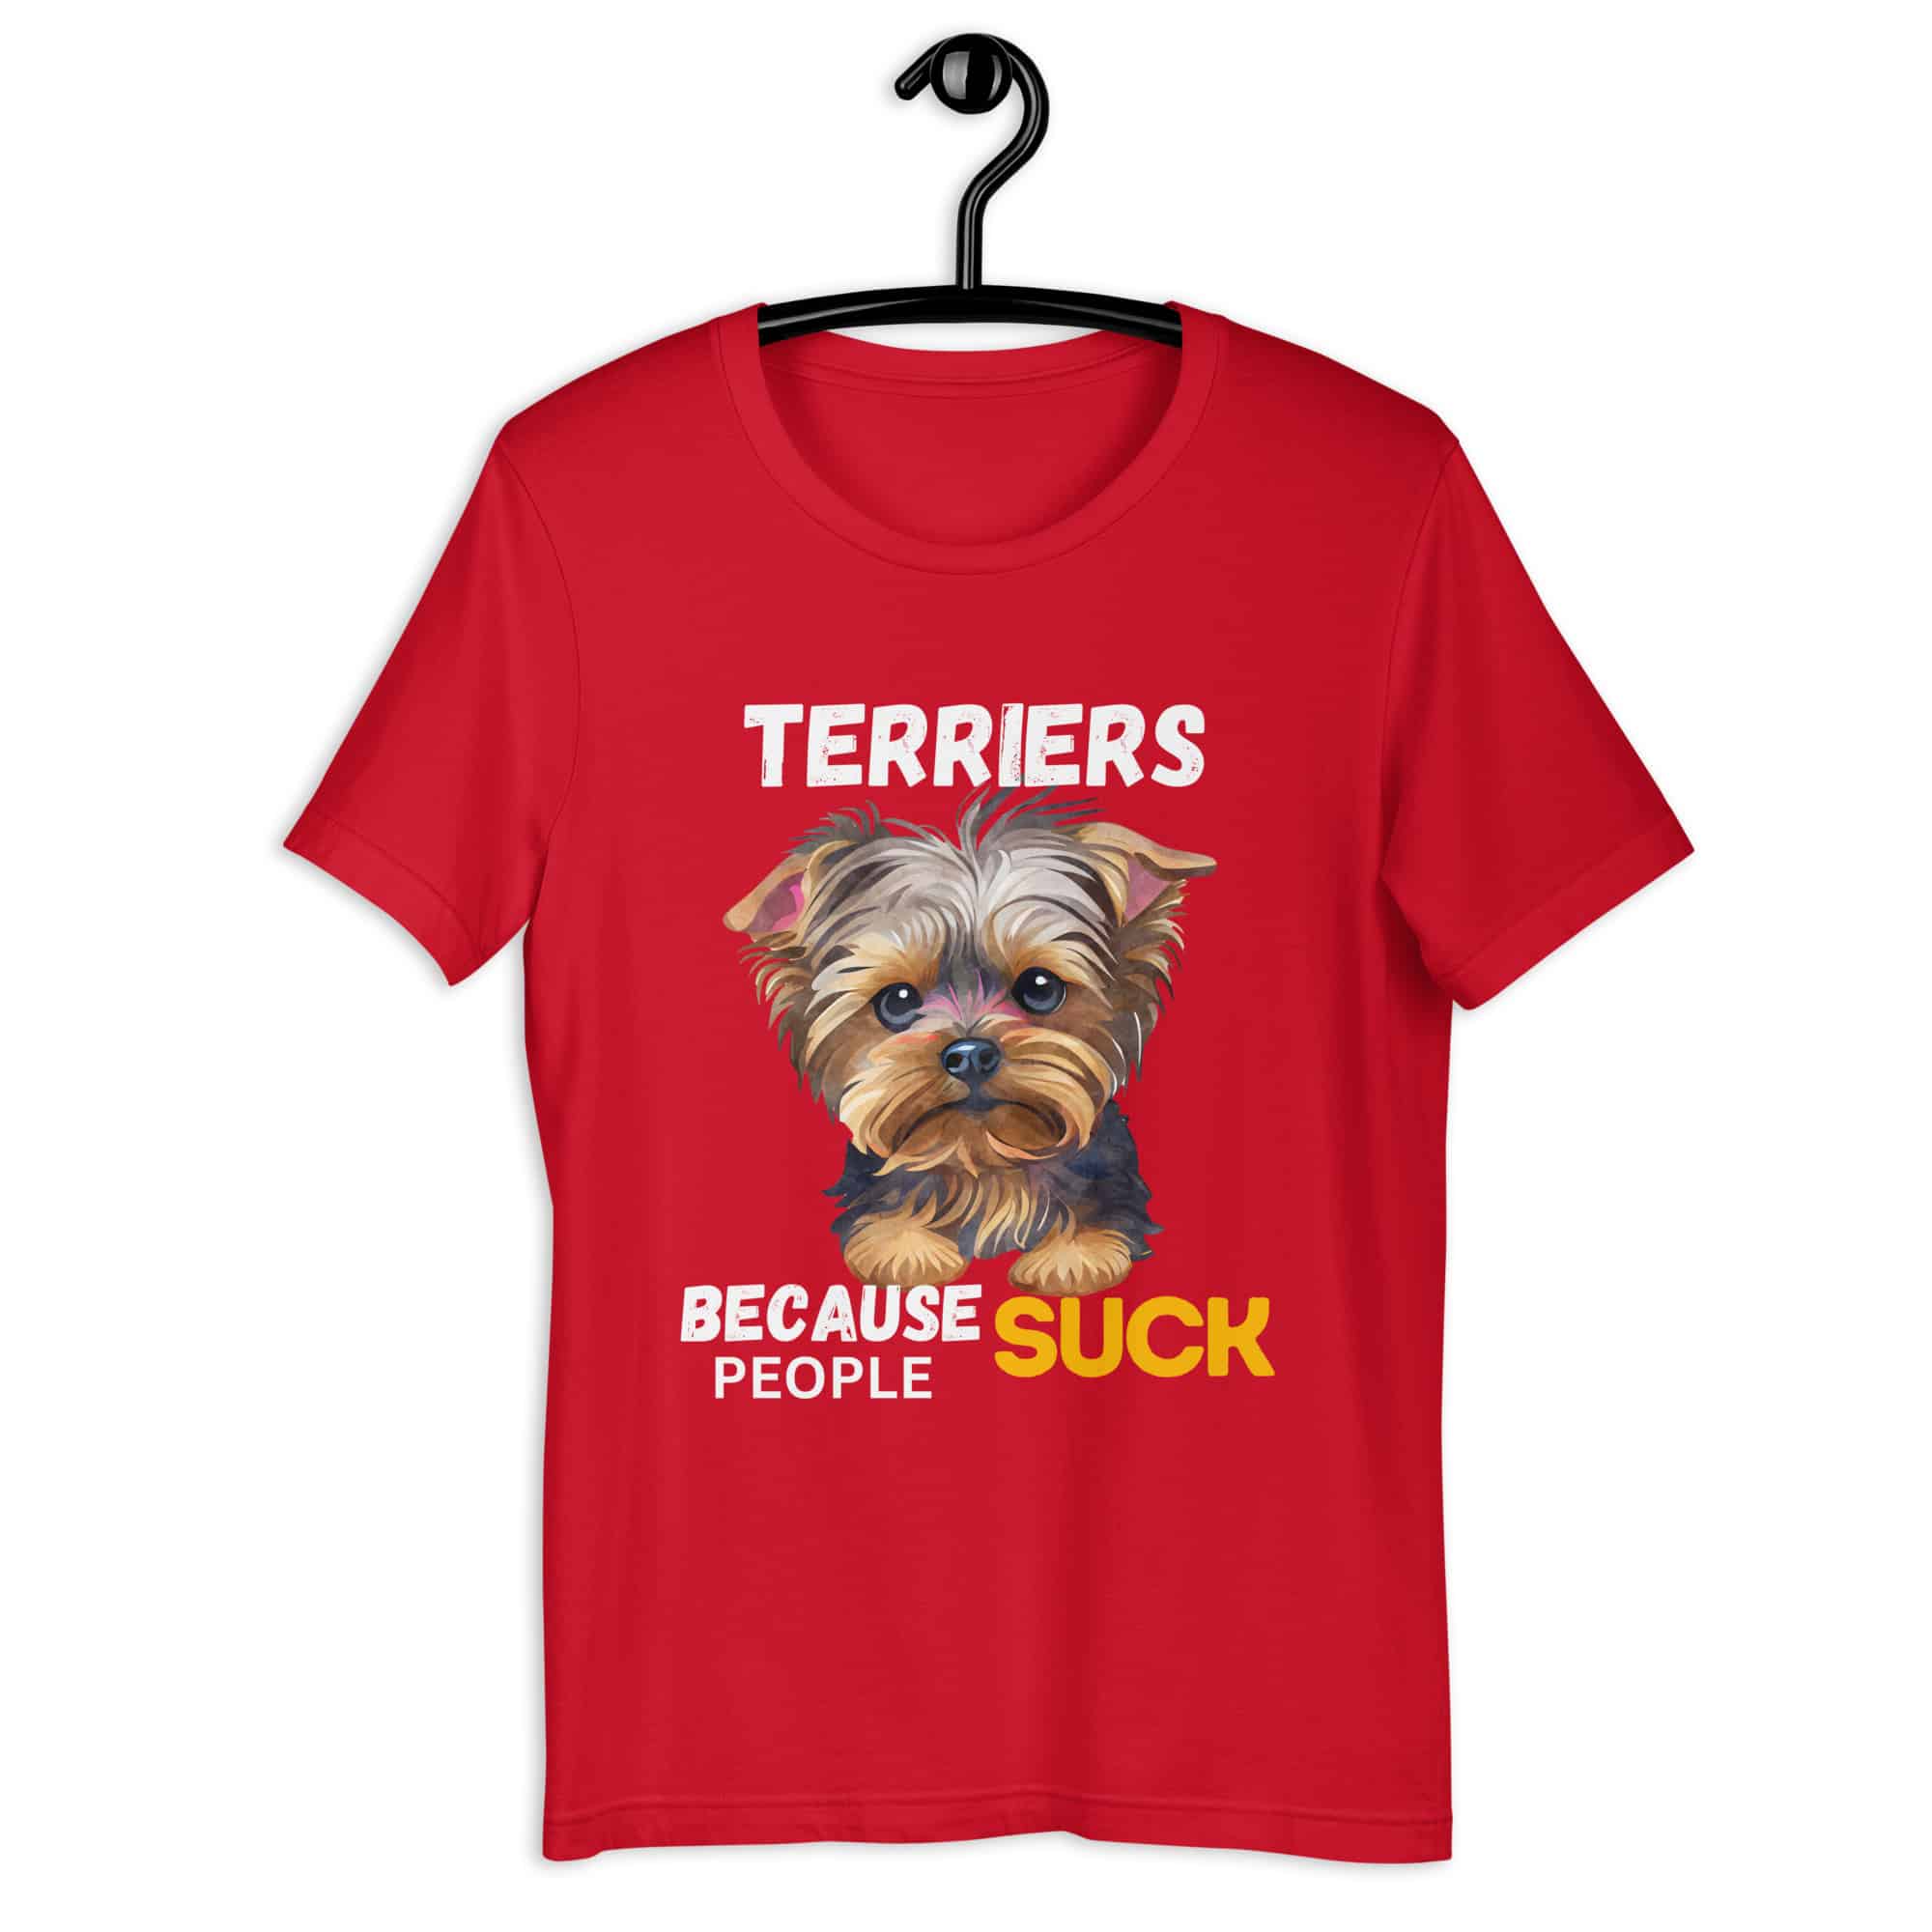 Terriers Because People Suck Unisex T-Shirt red